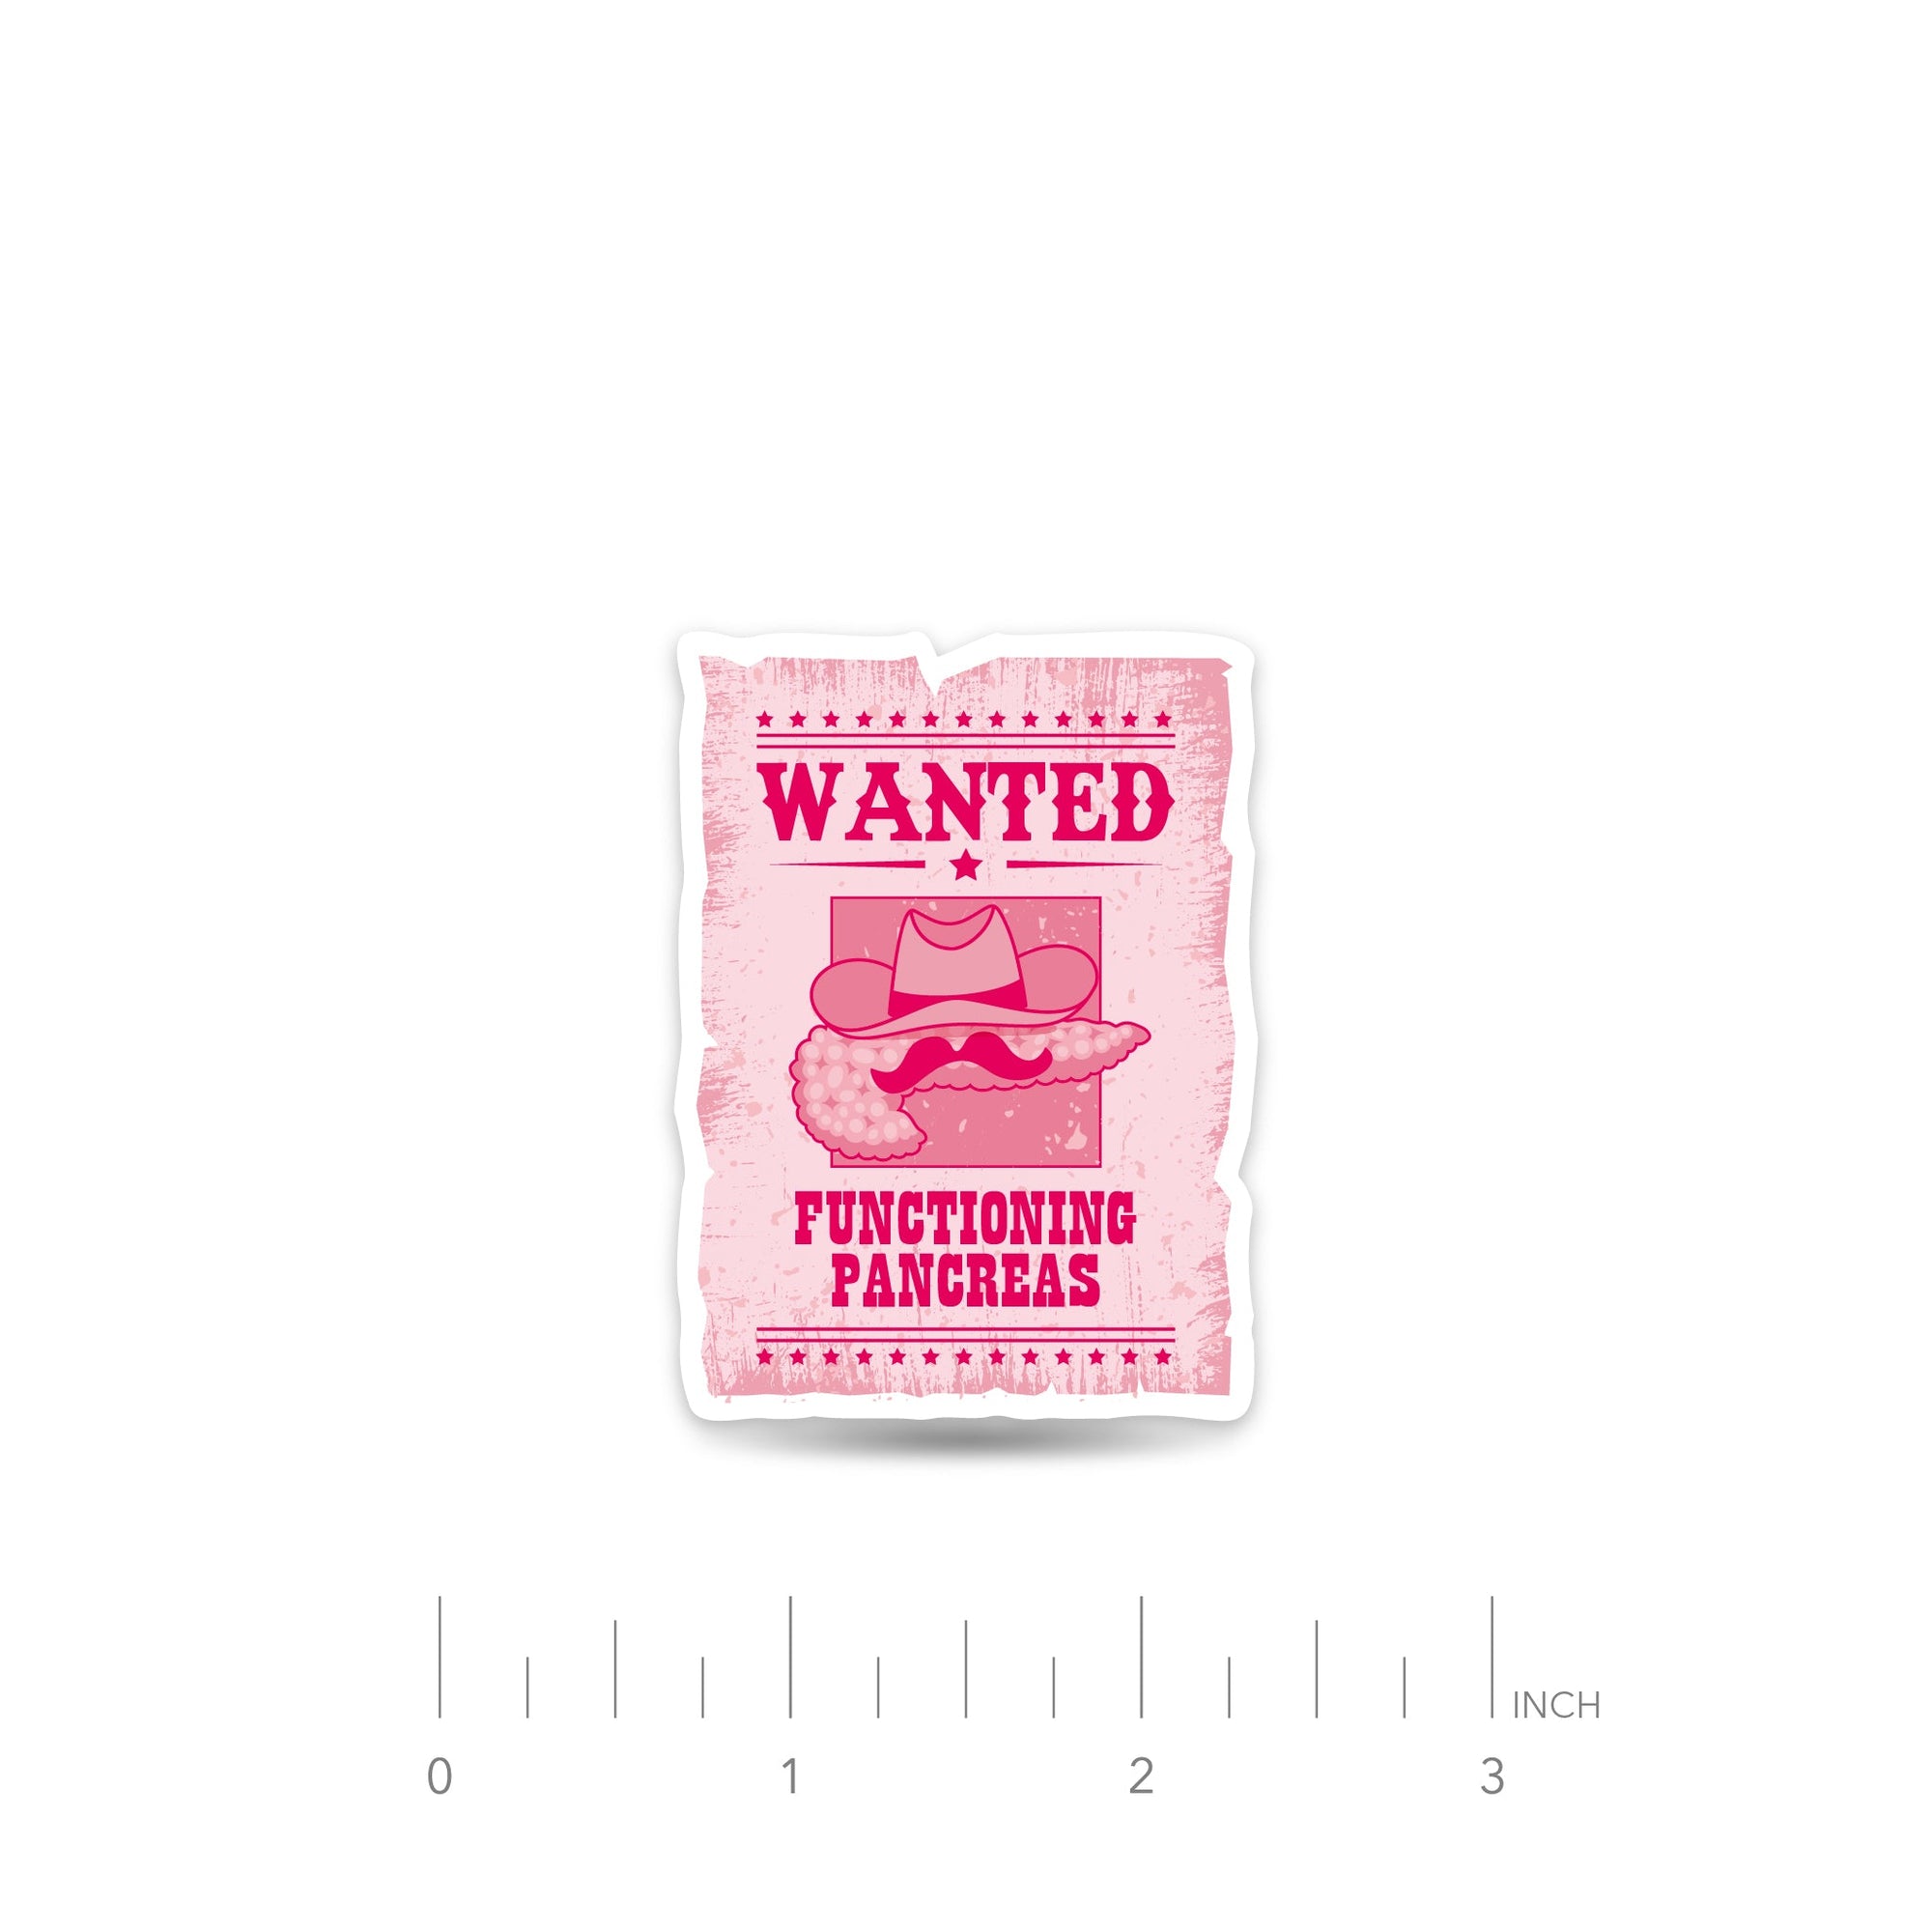 ExpressionMed Wanted Poster in Pink Decal Sticker, Single Sticker, Pancreas Wanted Themed Pink Fun Sticker, CGM Tandem T-Slim Device Cover